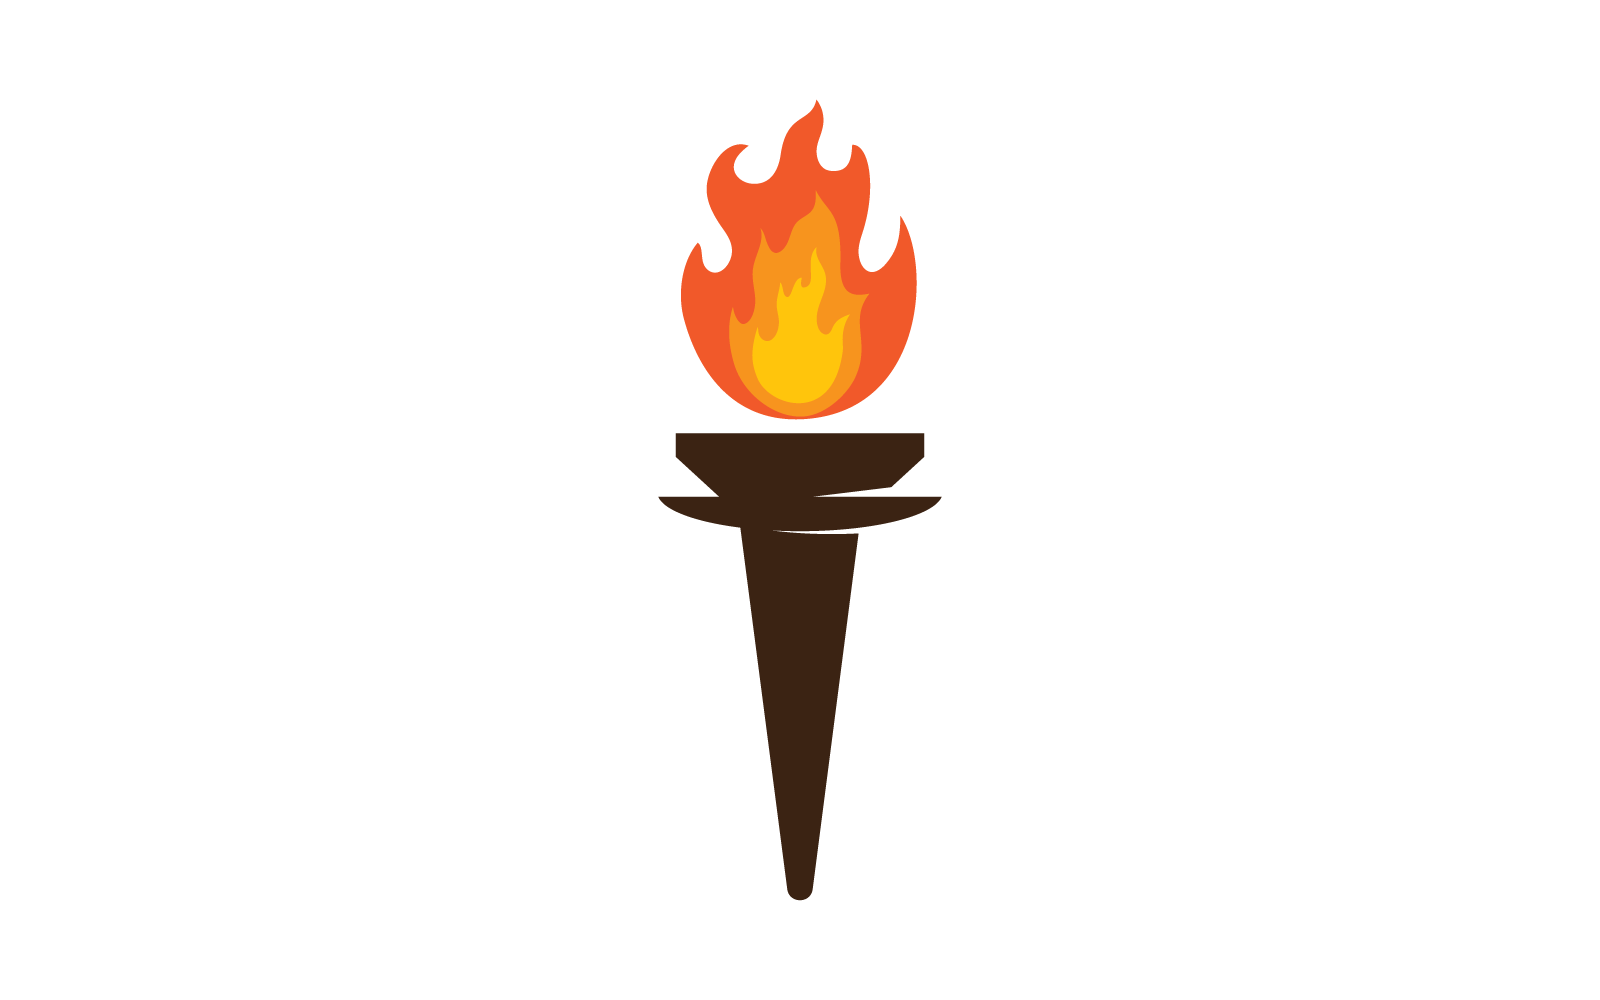 Illustration of torch fire icon design template